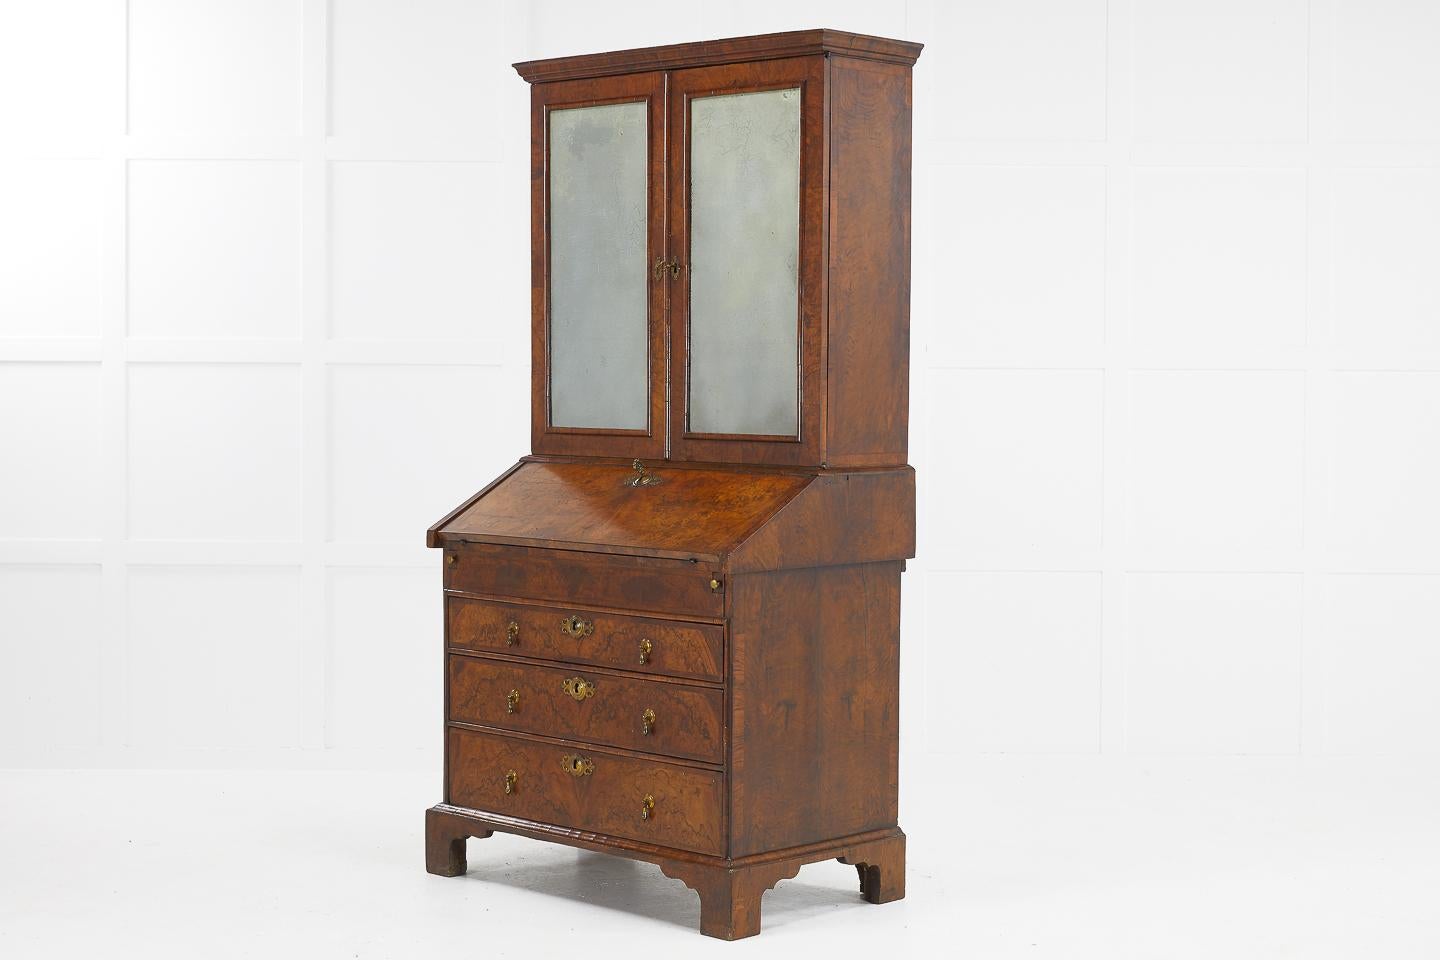 English 18th century walnut bureau cabinet with nicely aged foxed glass doors.
Adapted during the late 19th century to make a charming furnishing piece.
  